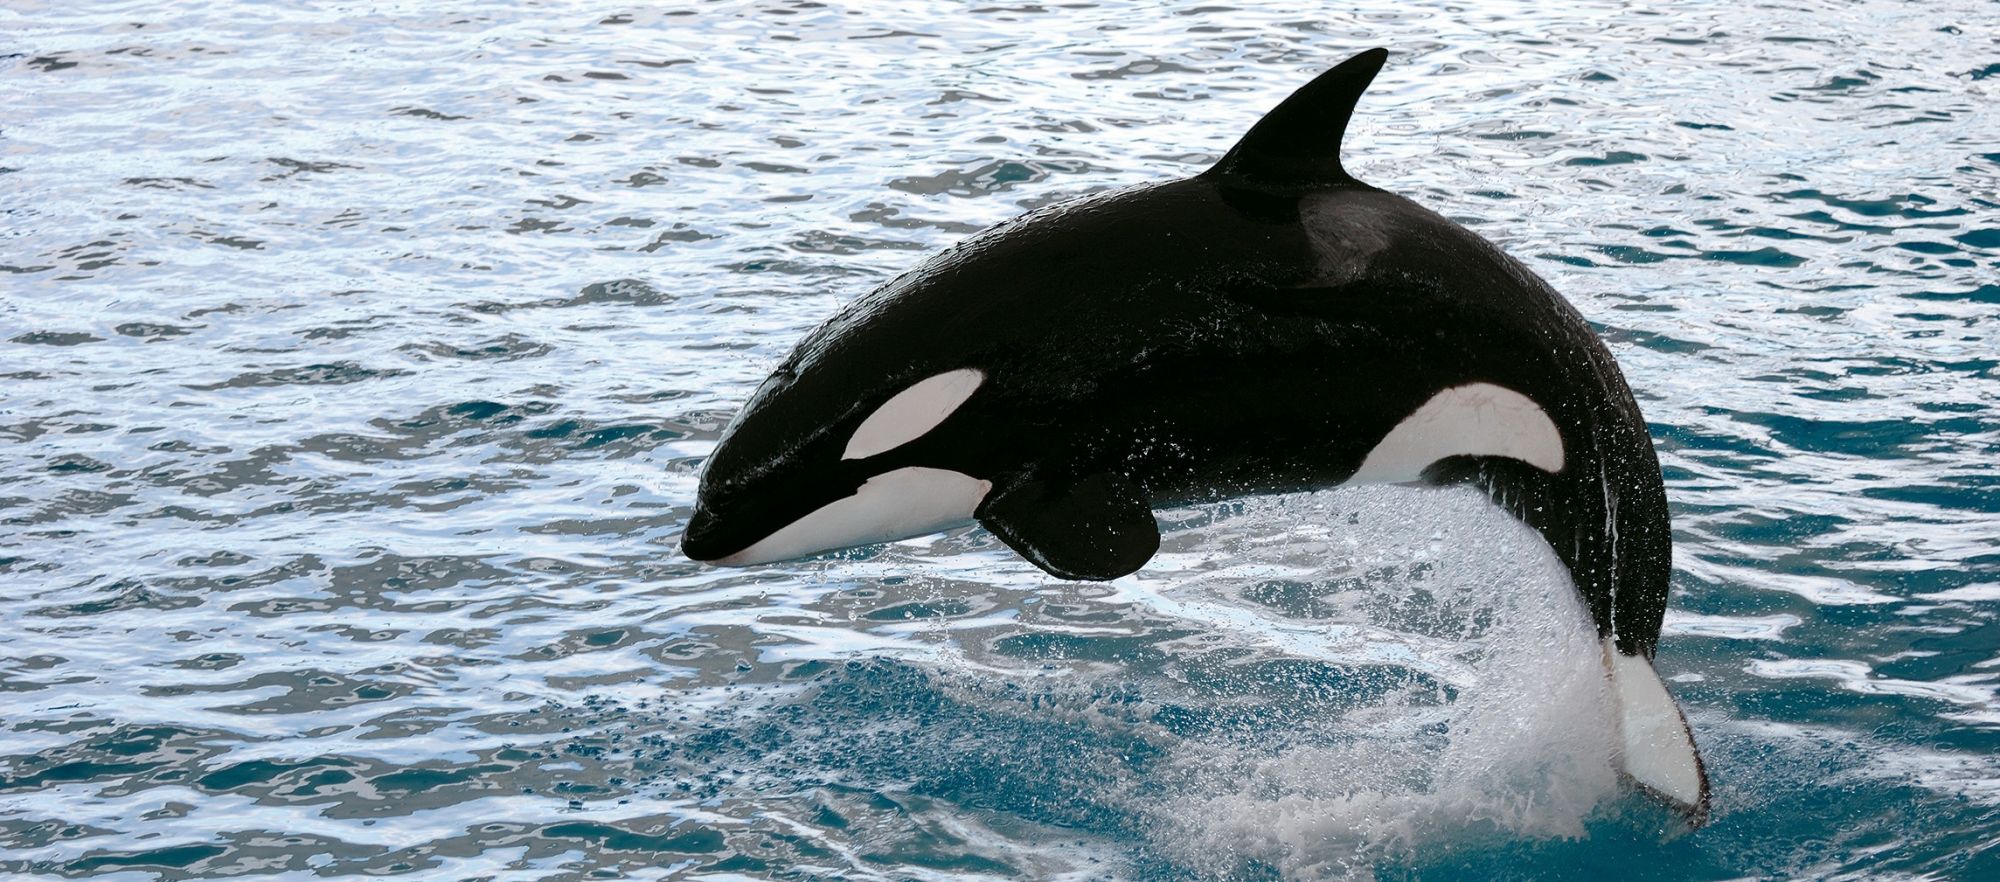 whale, orca,killer whale jumping